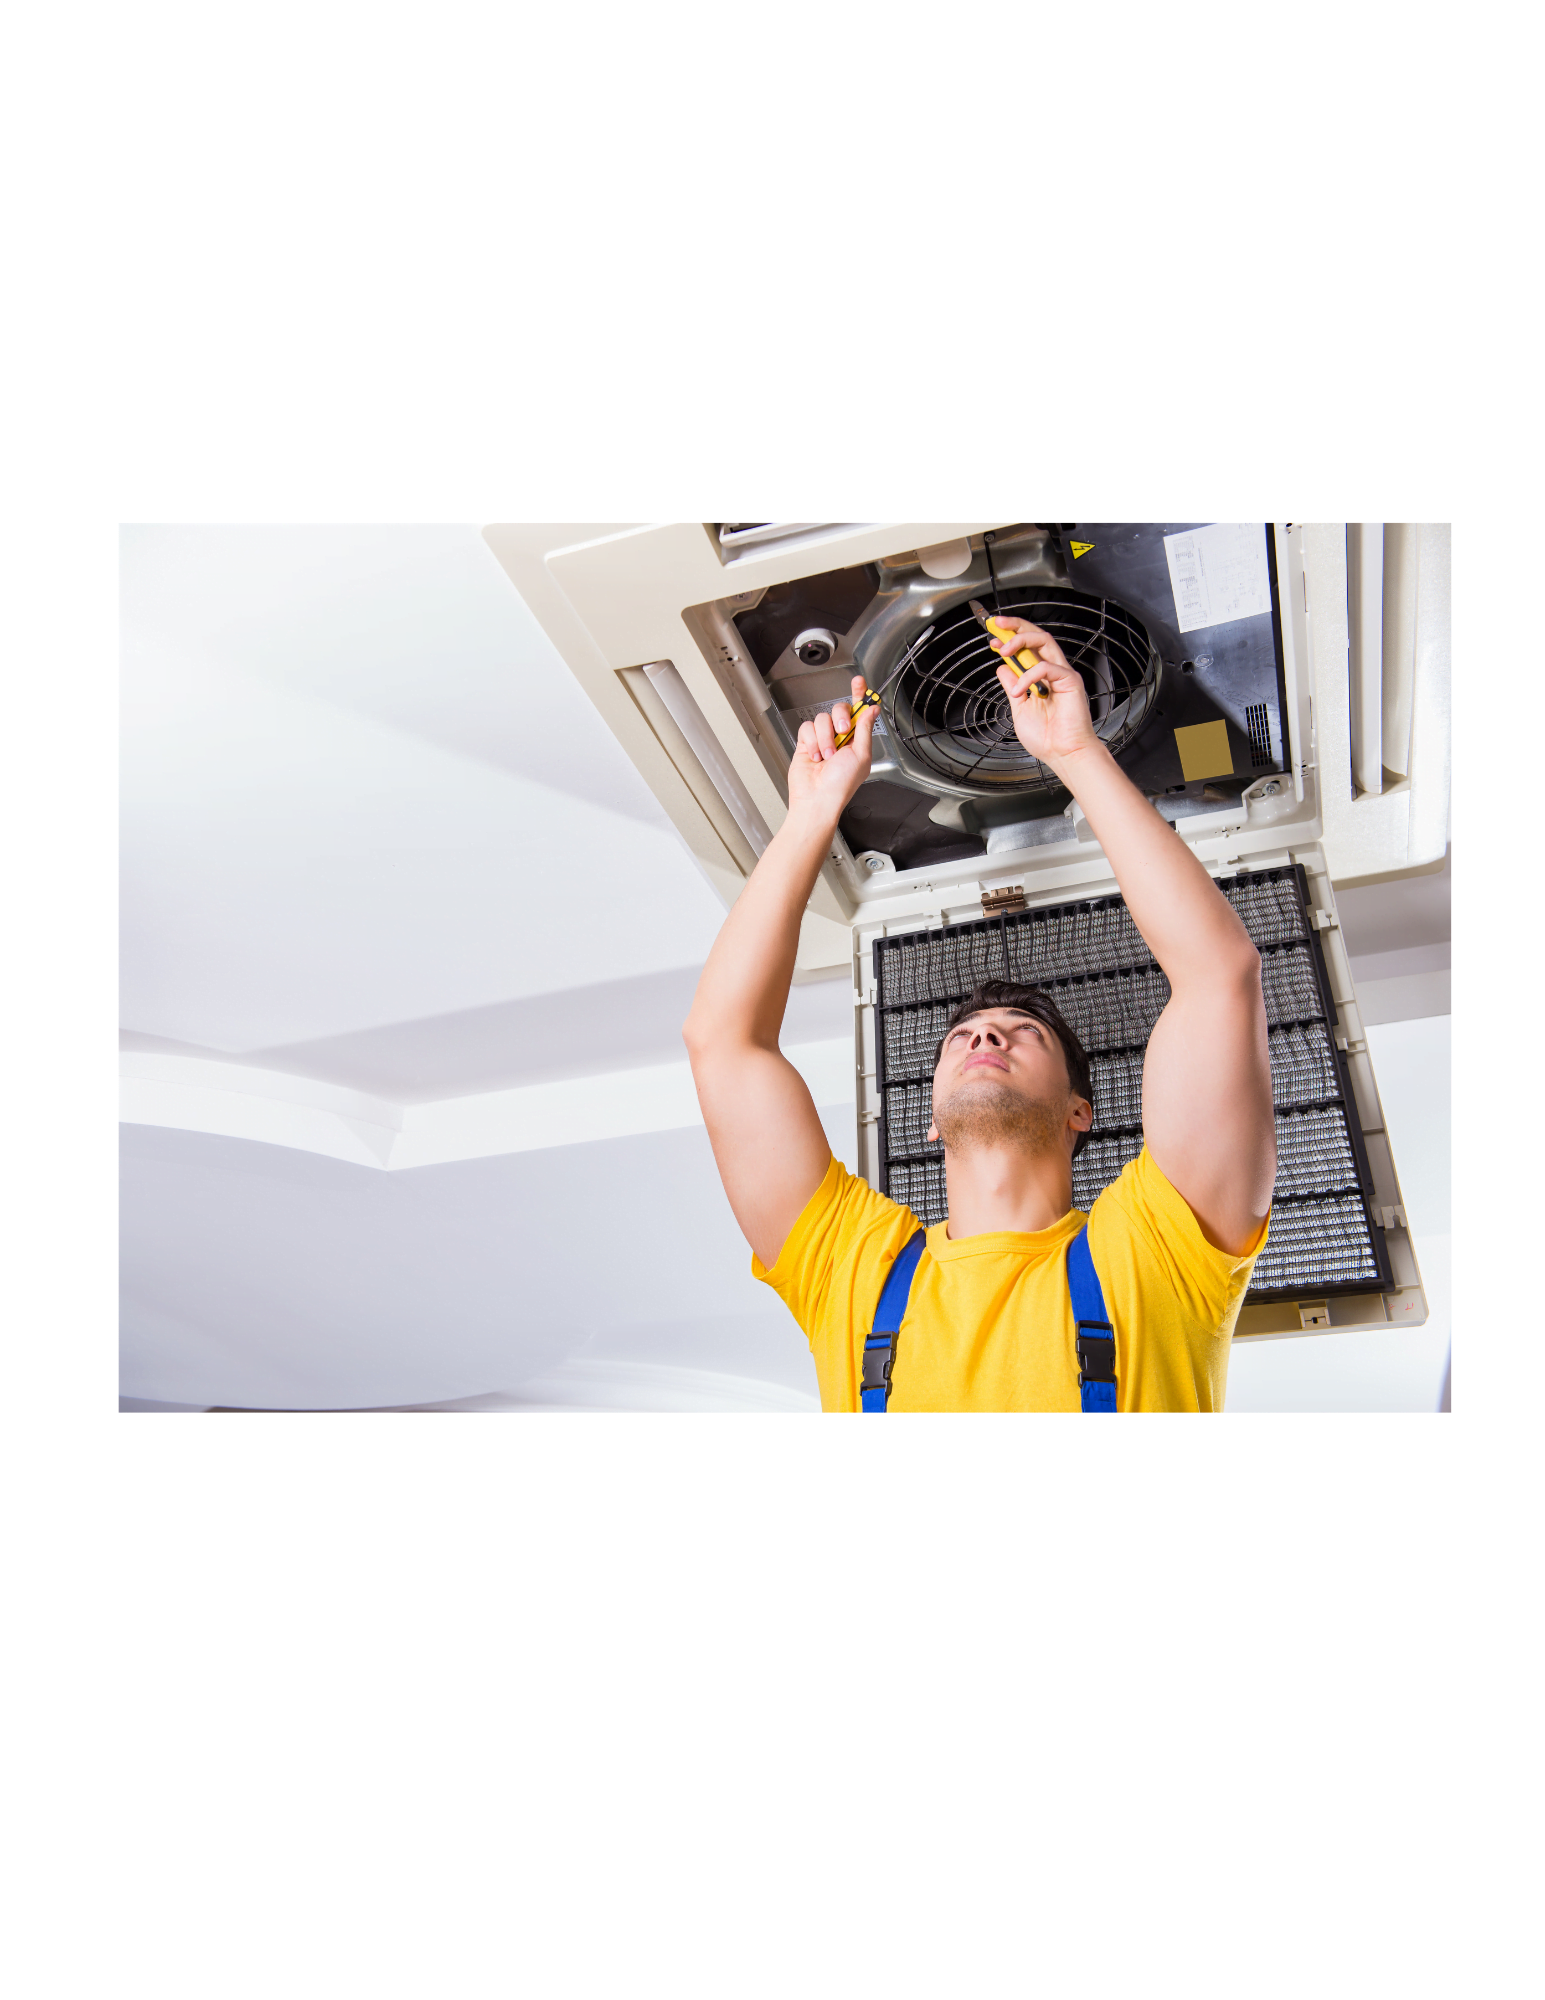 Next Level Spring Cleaning Tips from your Eco Friendly Air Conditioning and Heating Team!